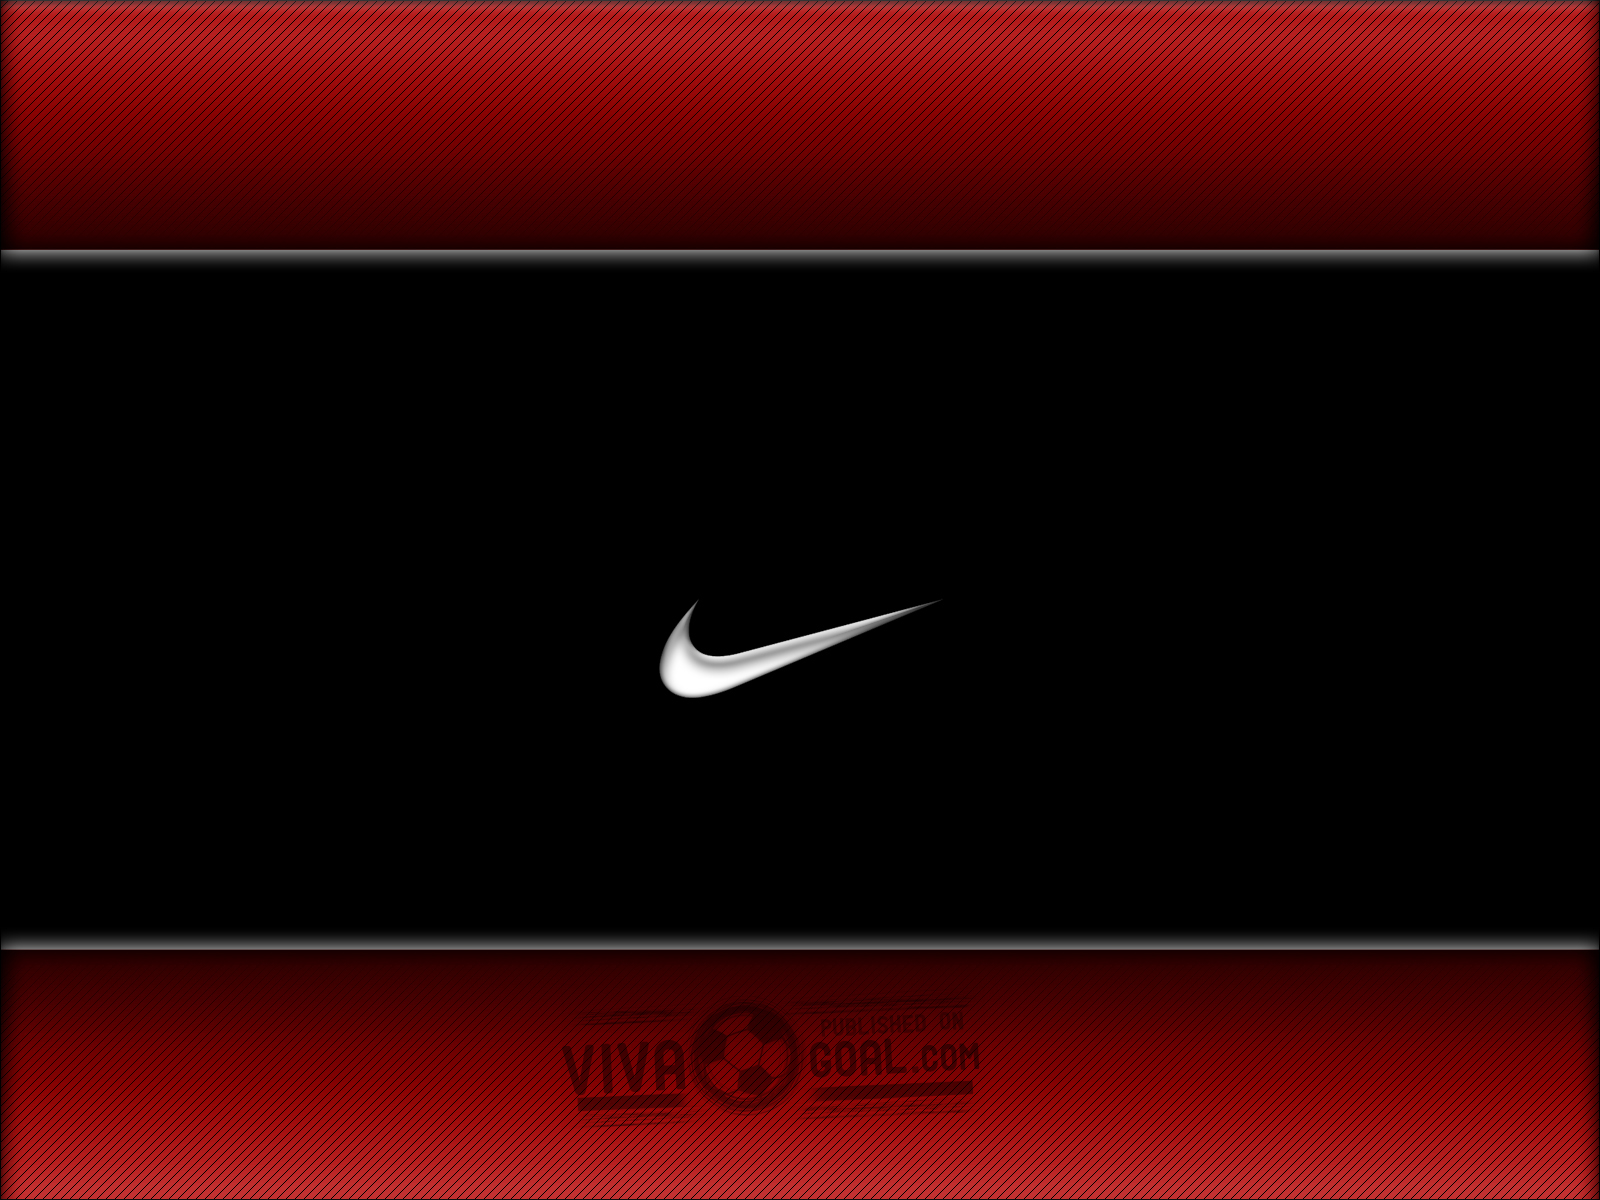 Nike Wallpaper For Android   Wallpaper Pictures Gallery